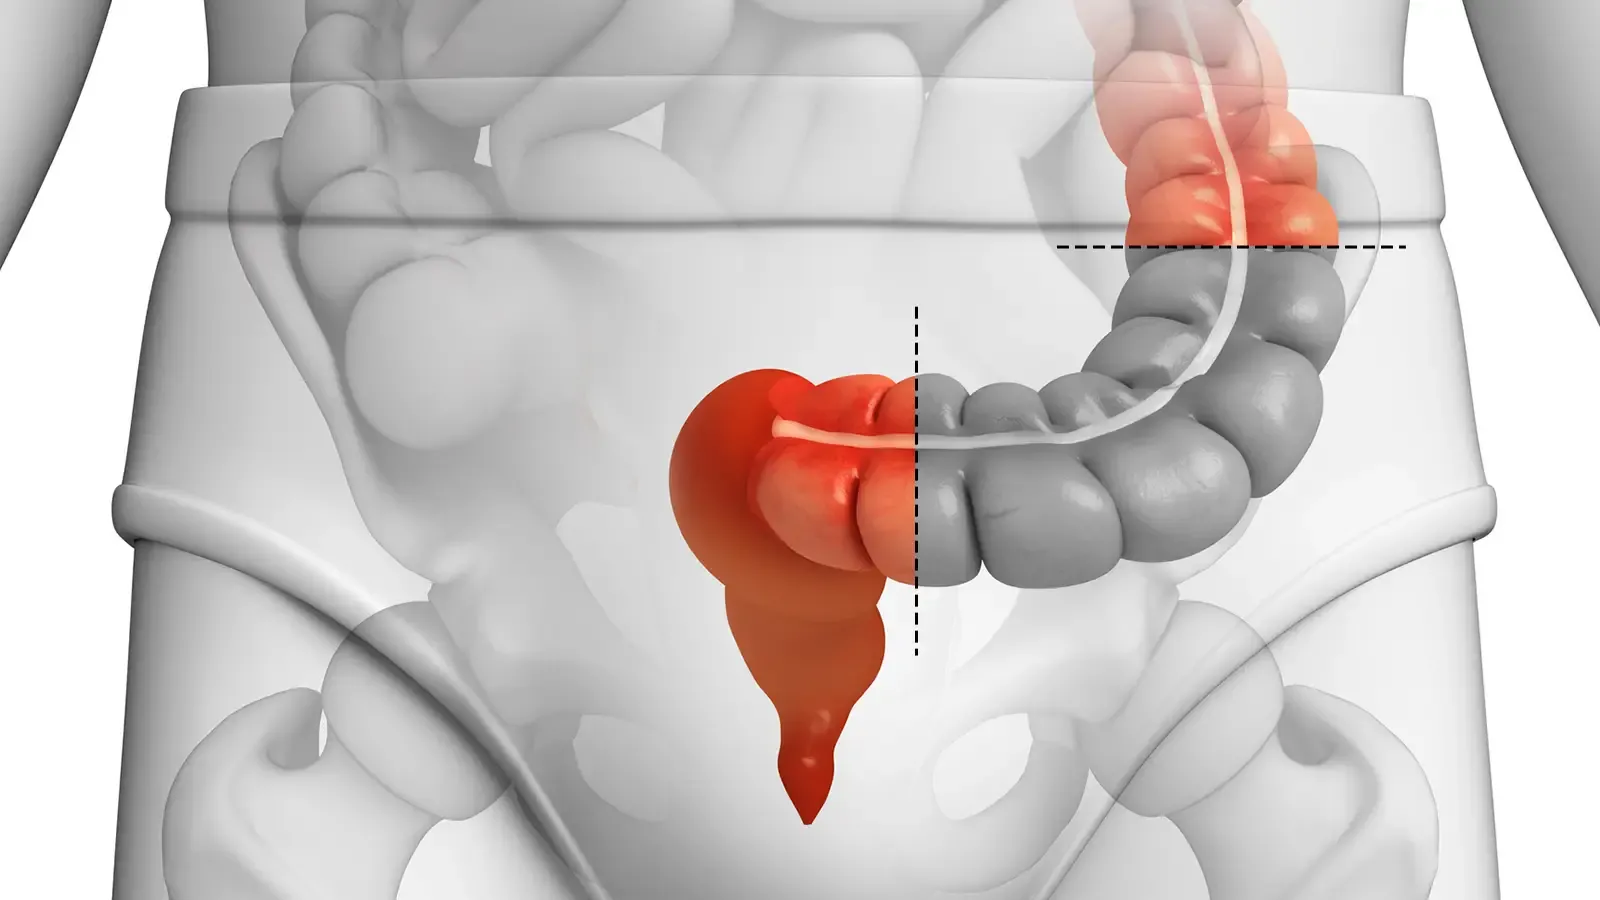 Elective Surgery for Diverticulitis tied to QOL Benefits, Fewer Recurrences